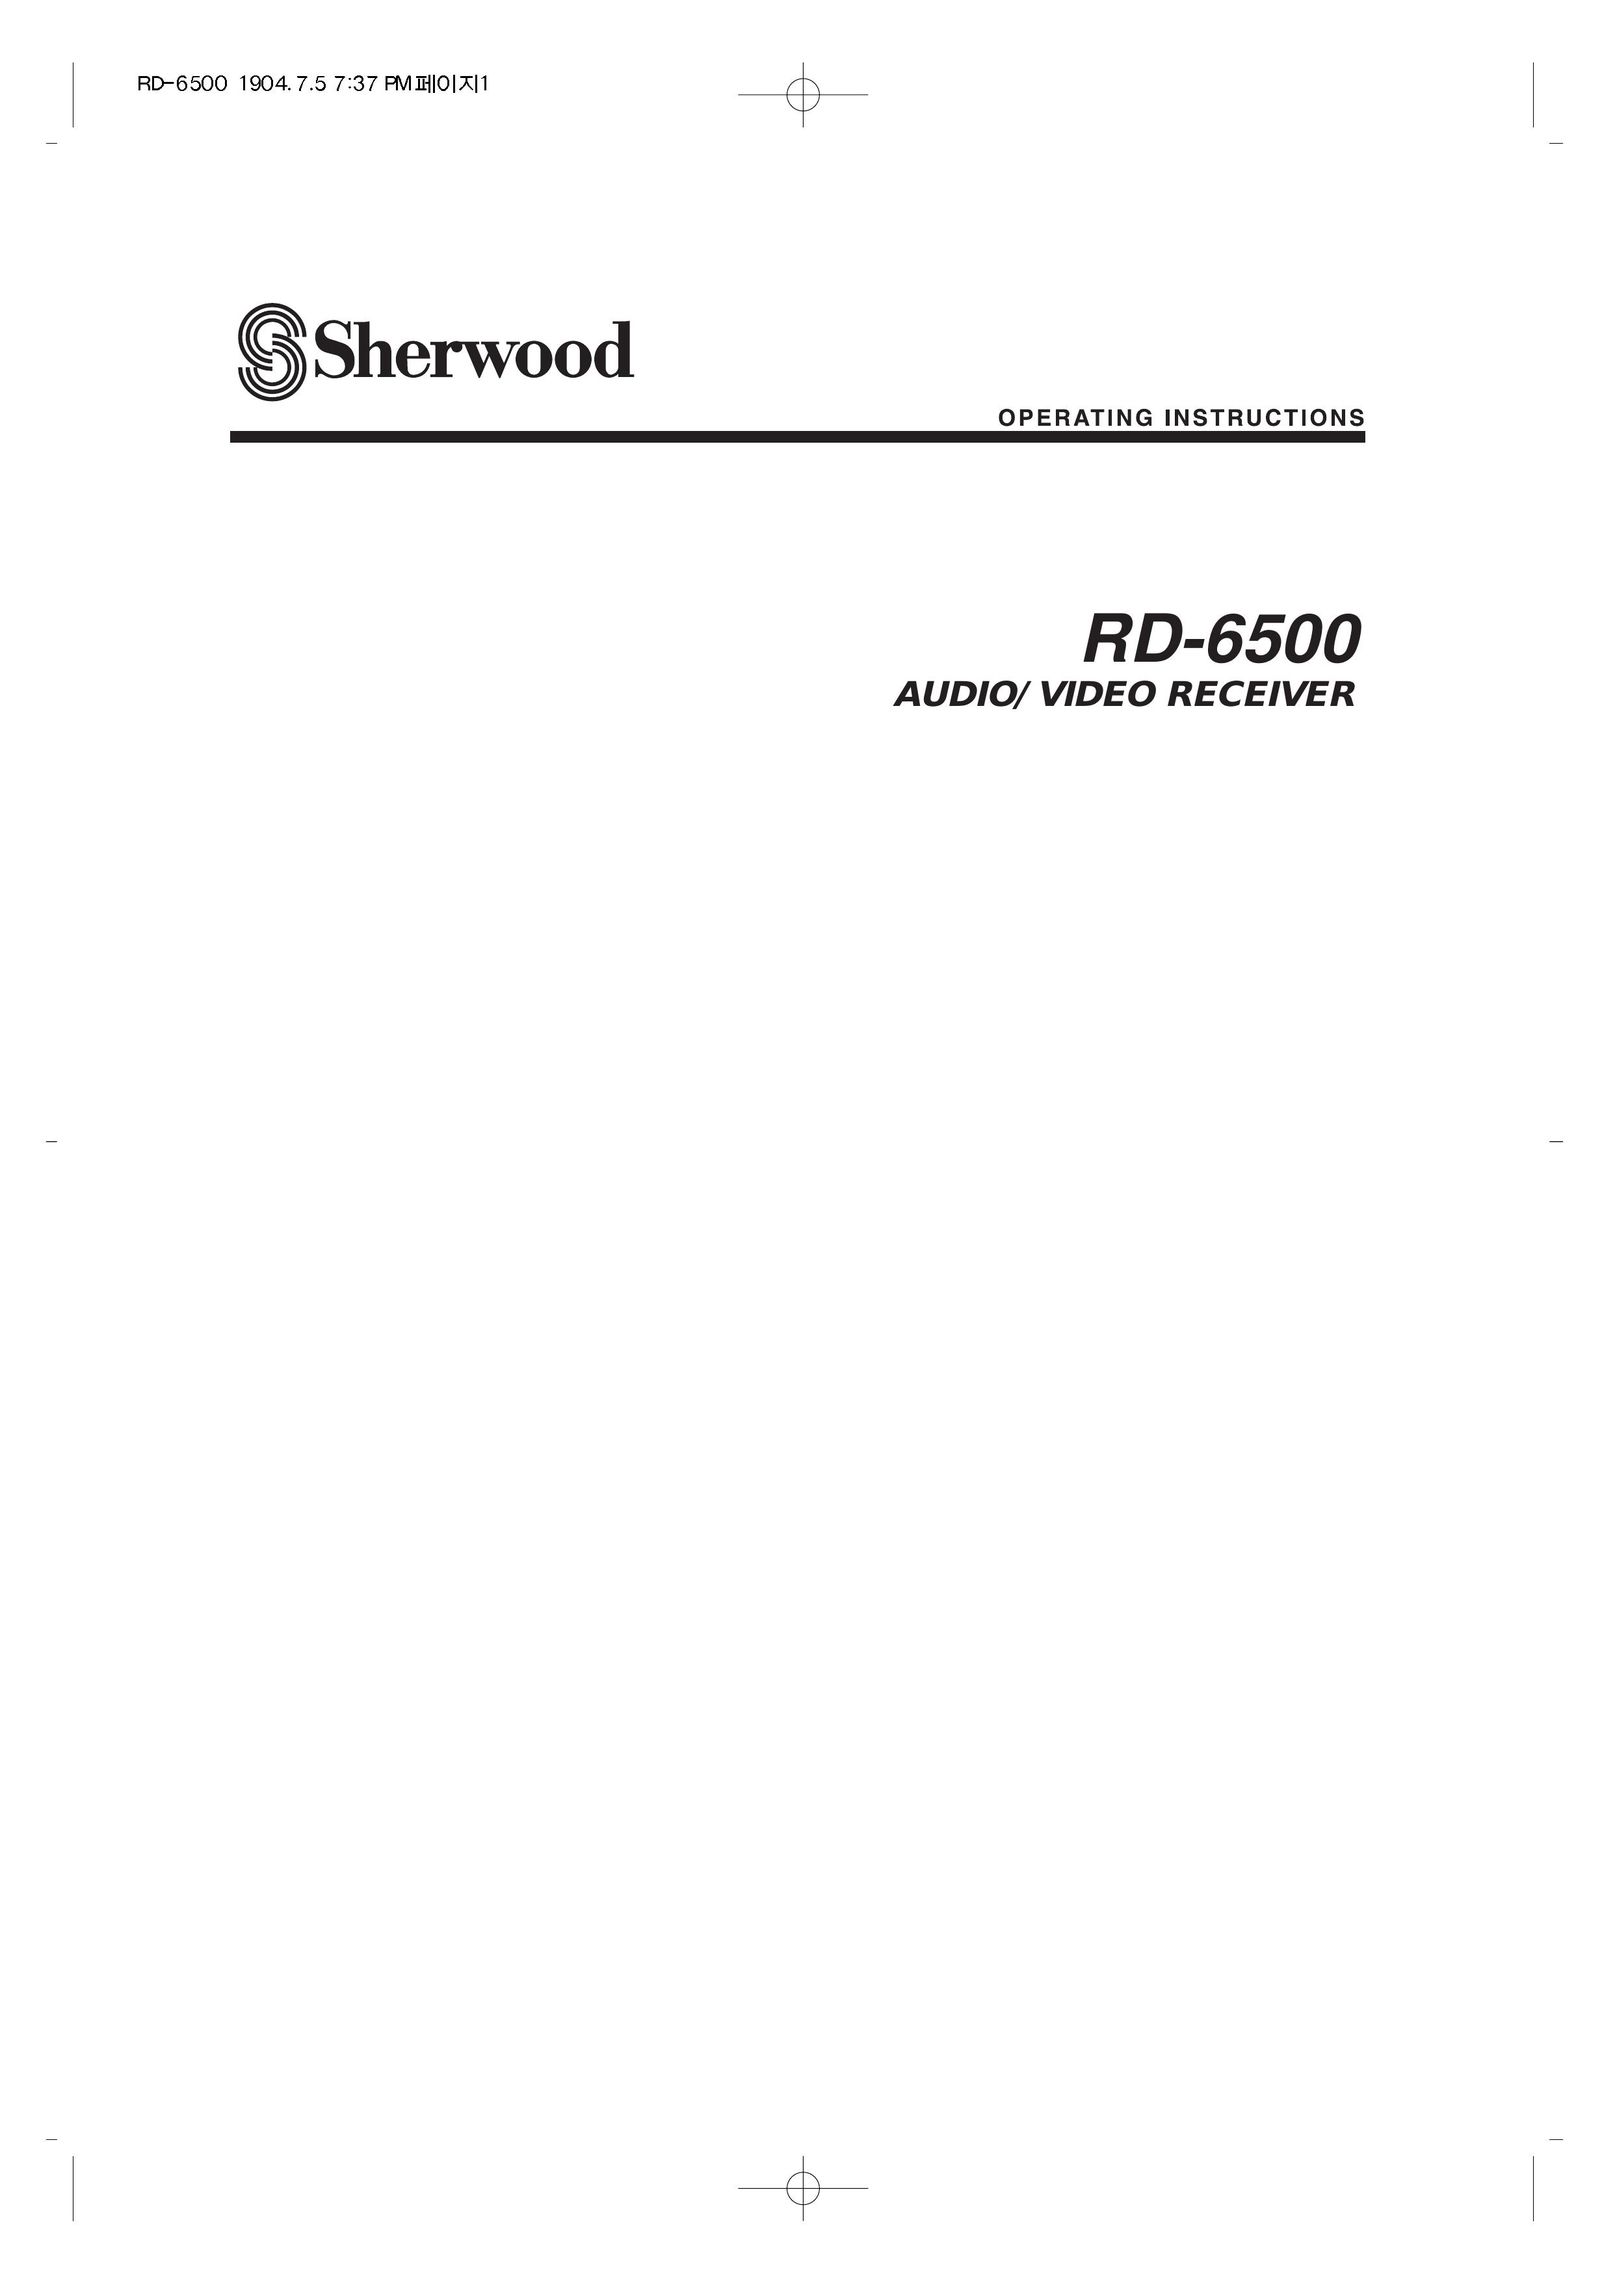 Sherwood RD-6500 Stereo System User Manual